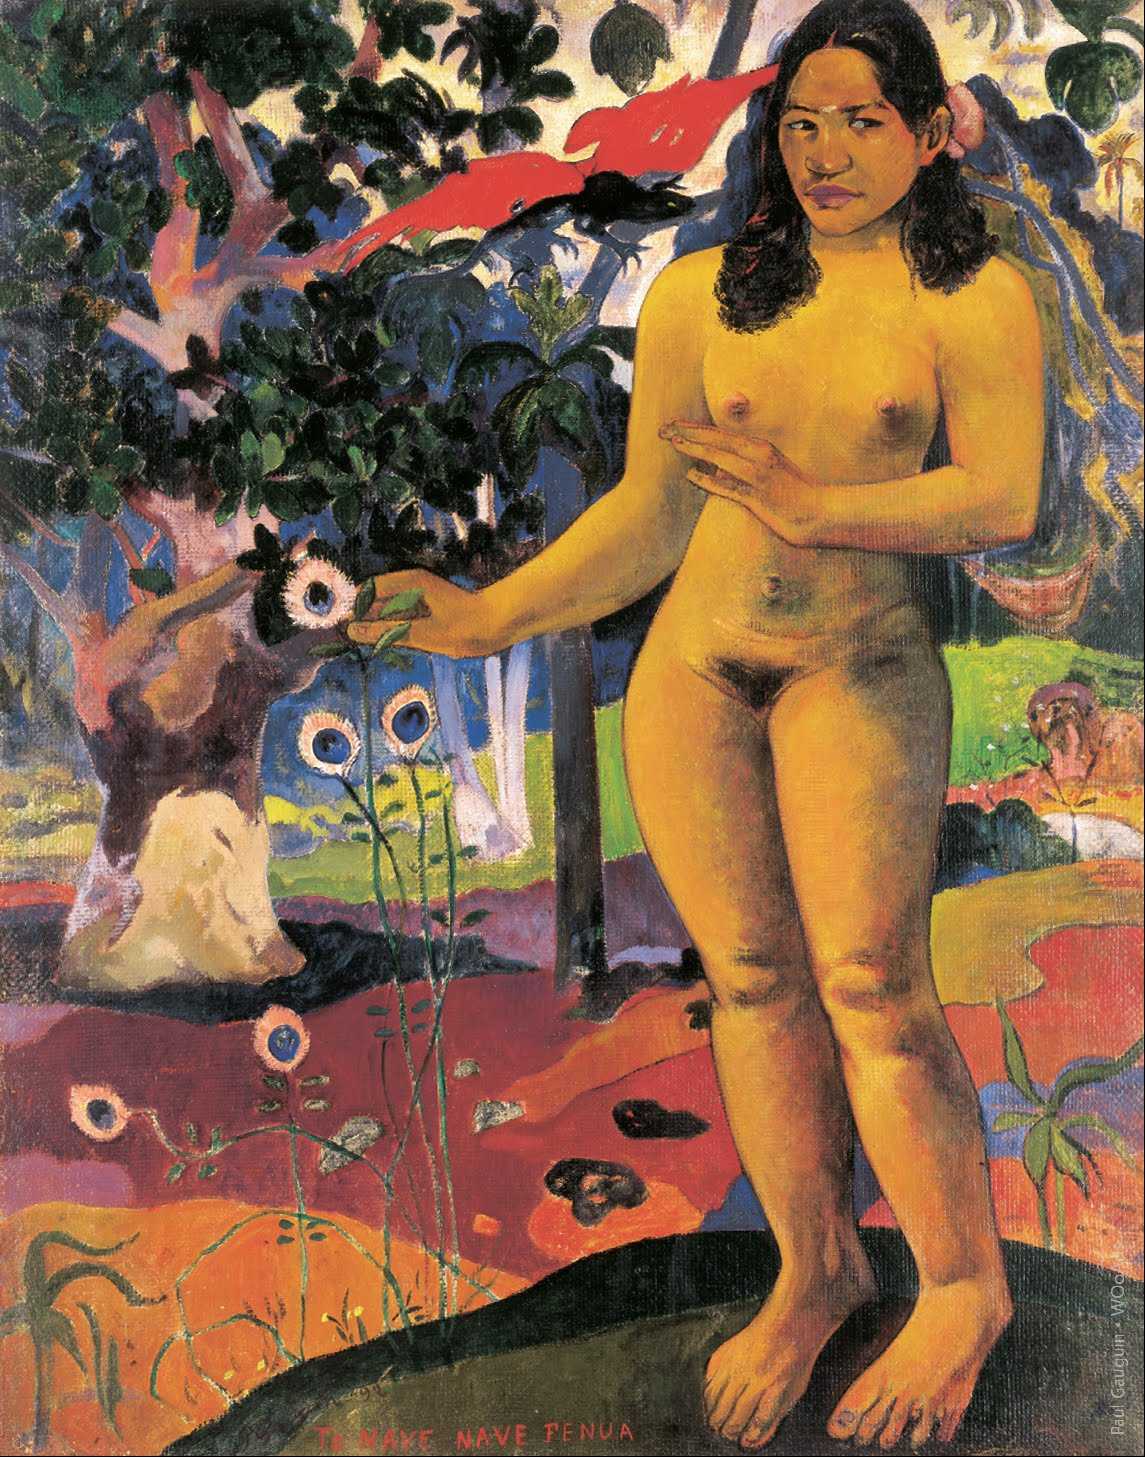 Painting by Paul Gauguin